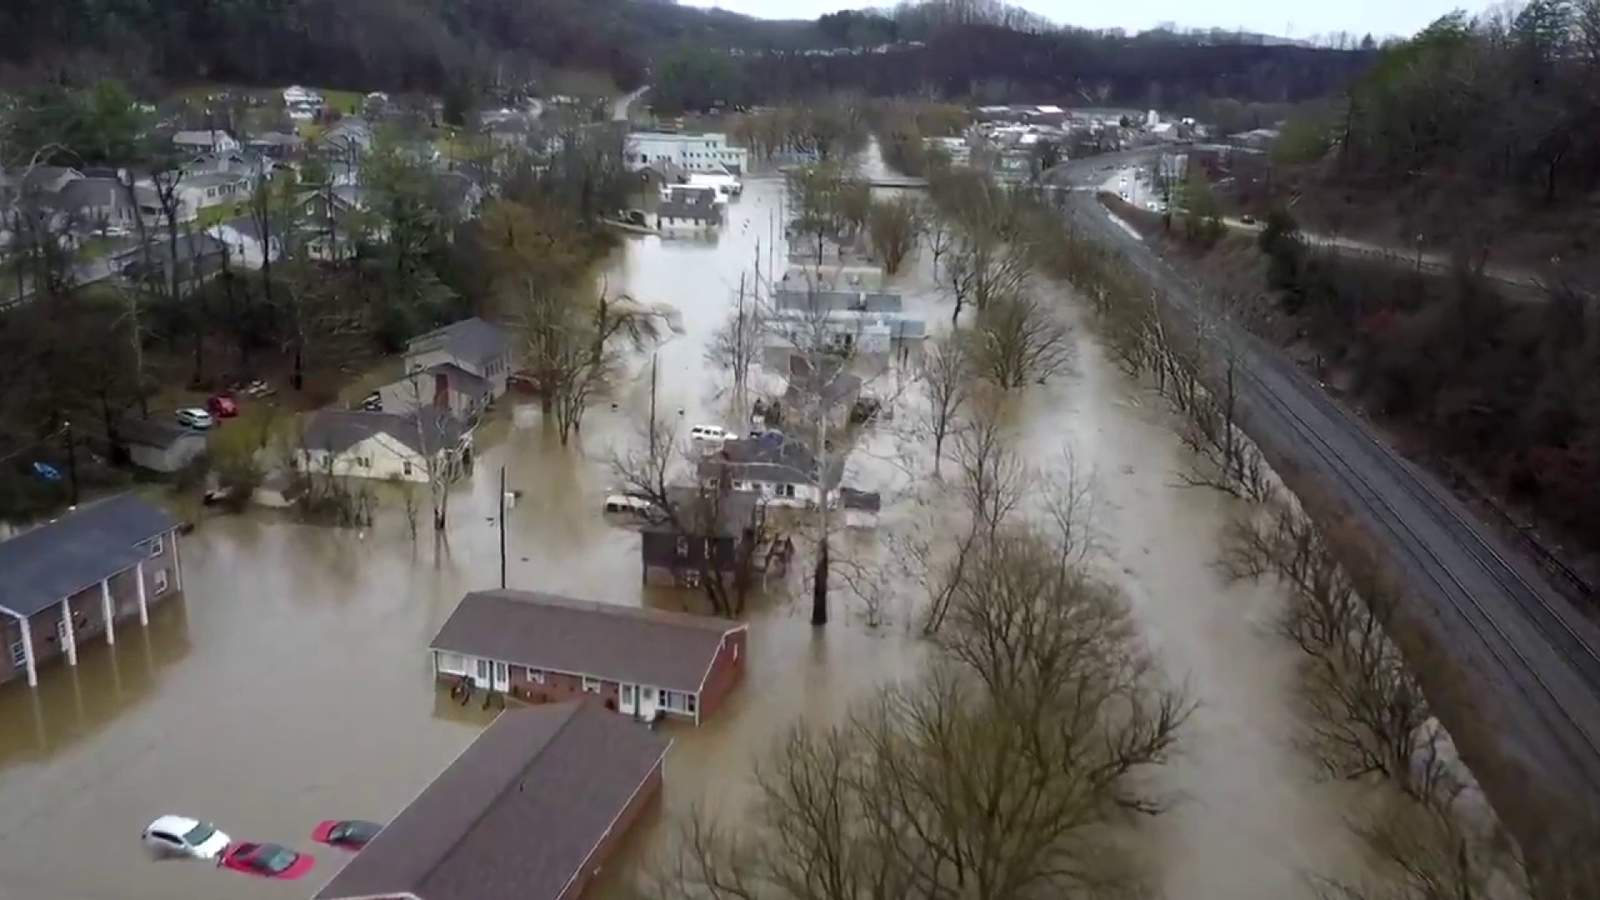 State of emergency issued as flooding hits parts of Southwest Virginia